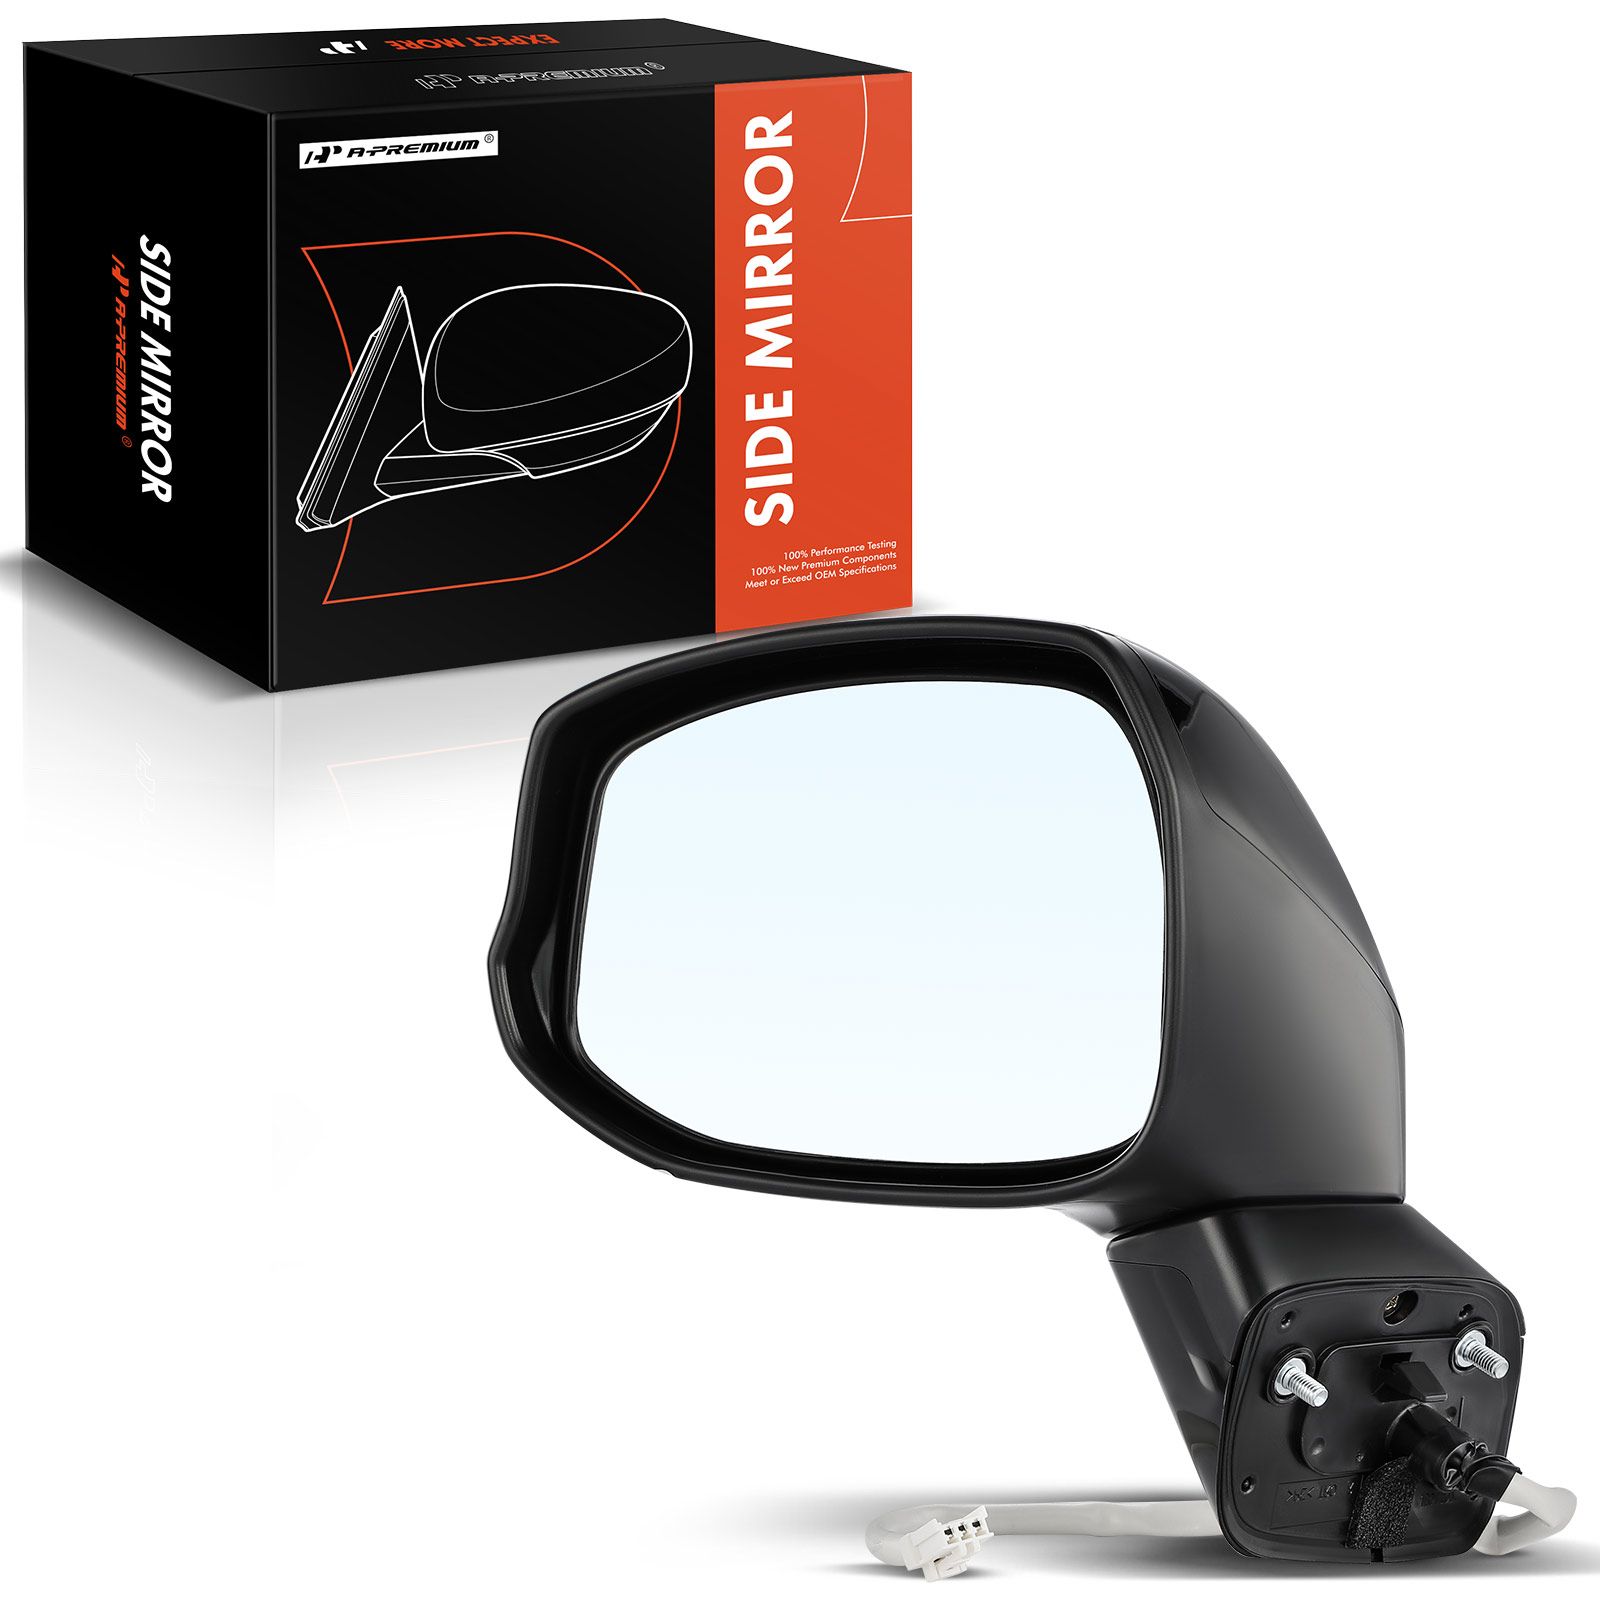 Front Driver Black Power Mirror for Honda Civic 2012-2015